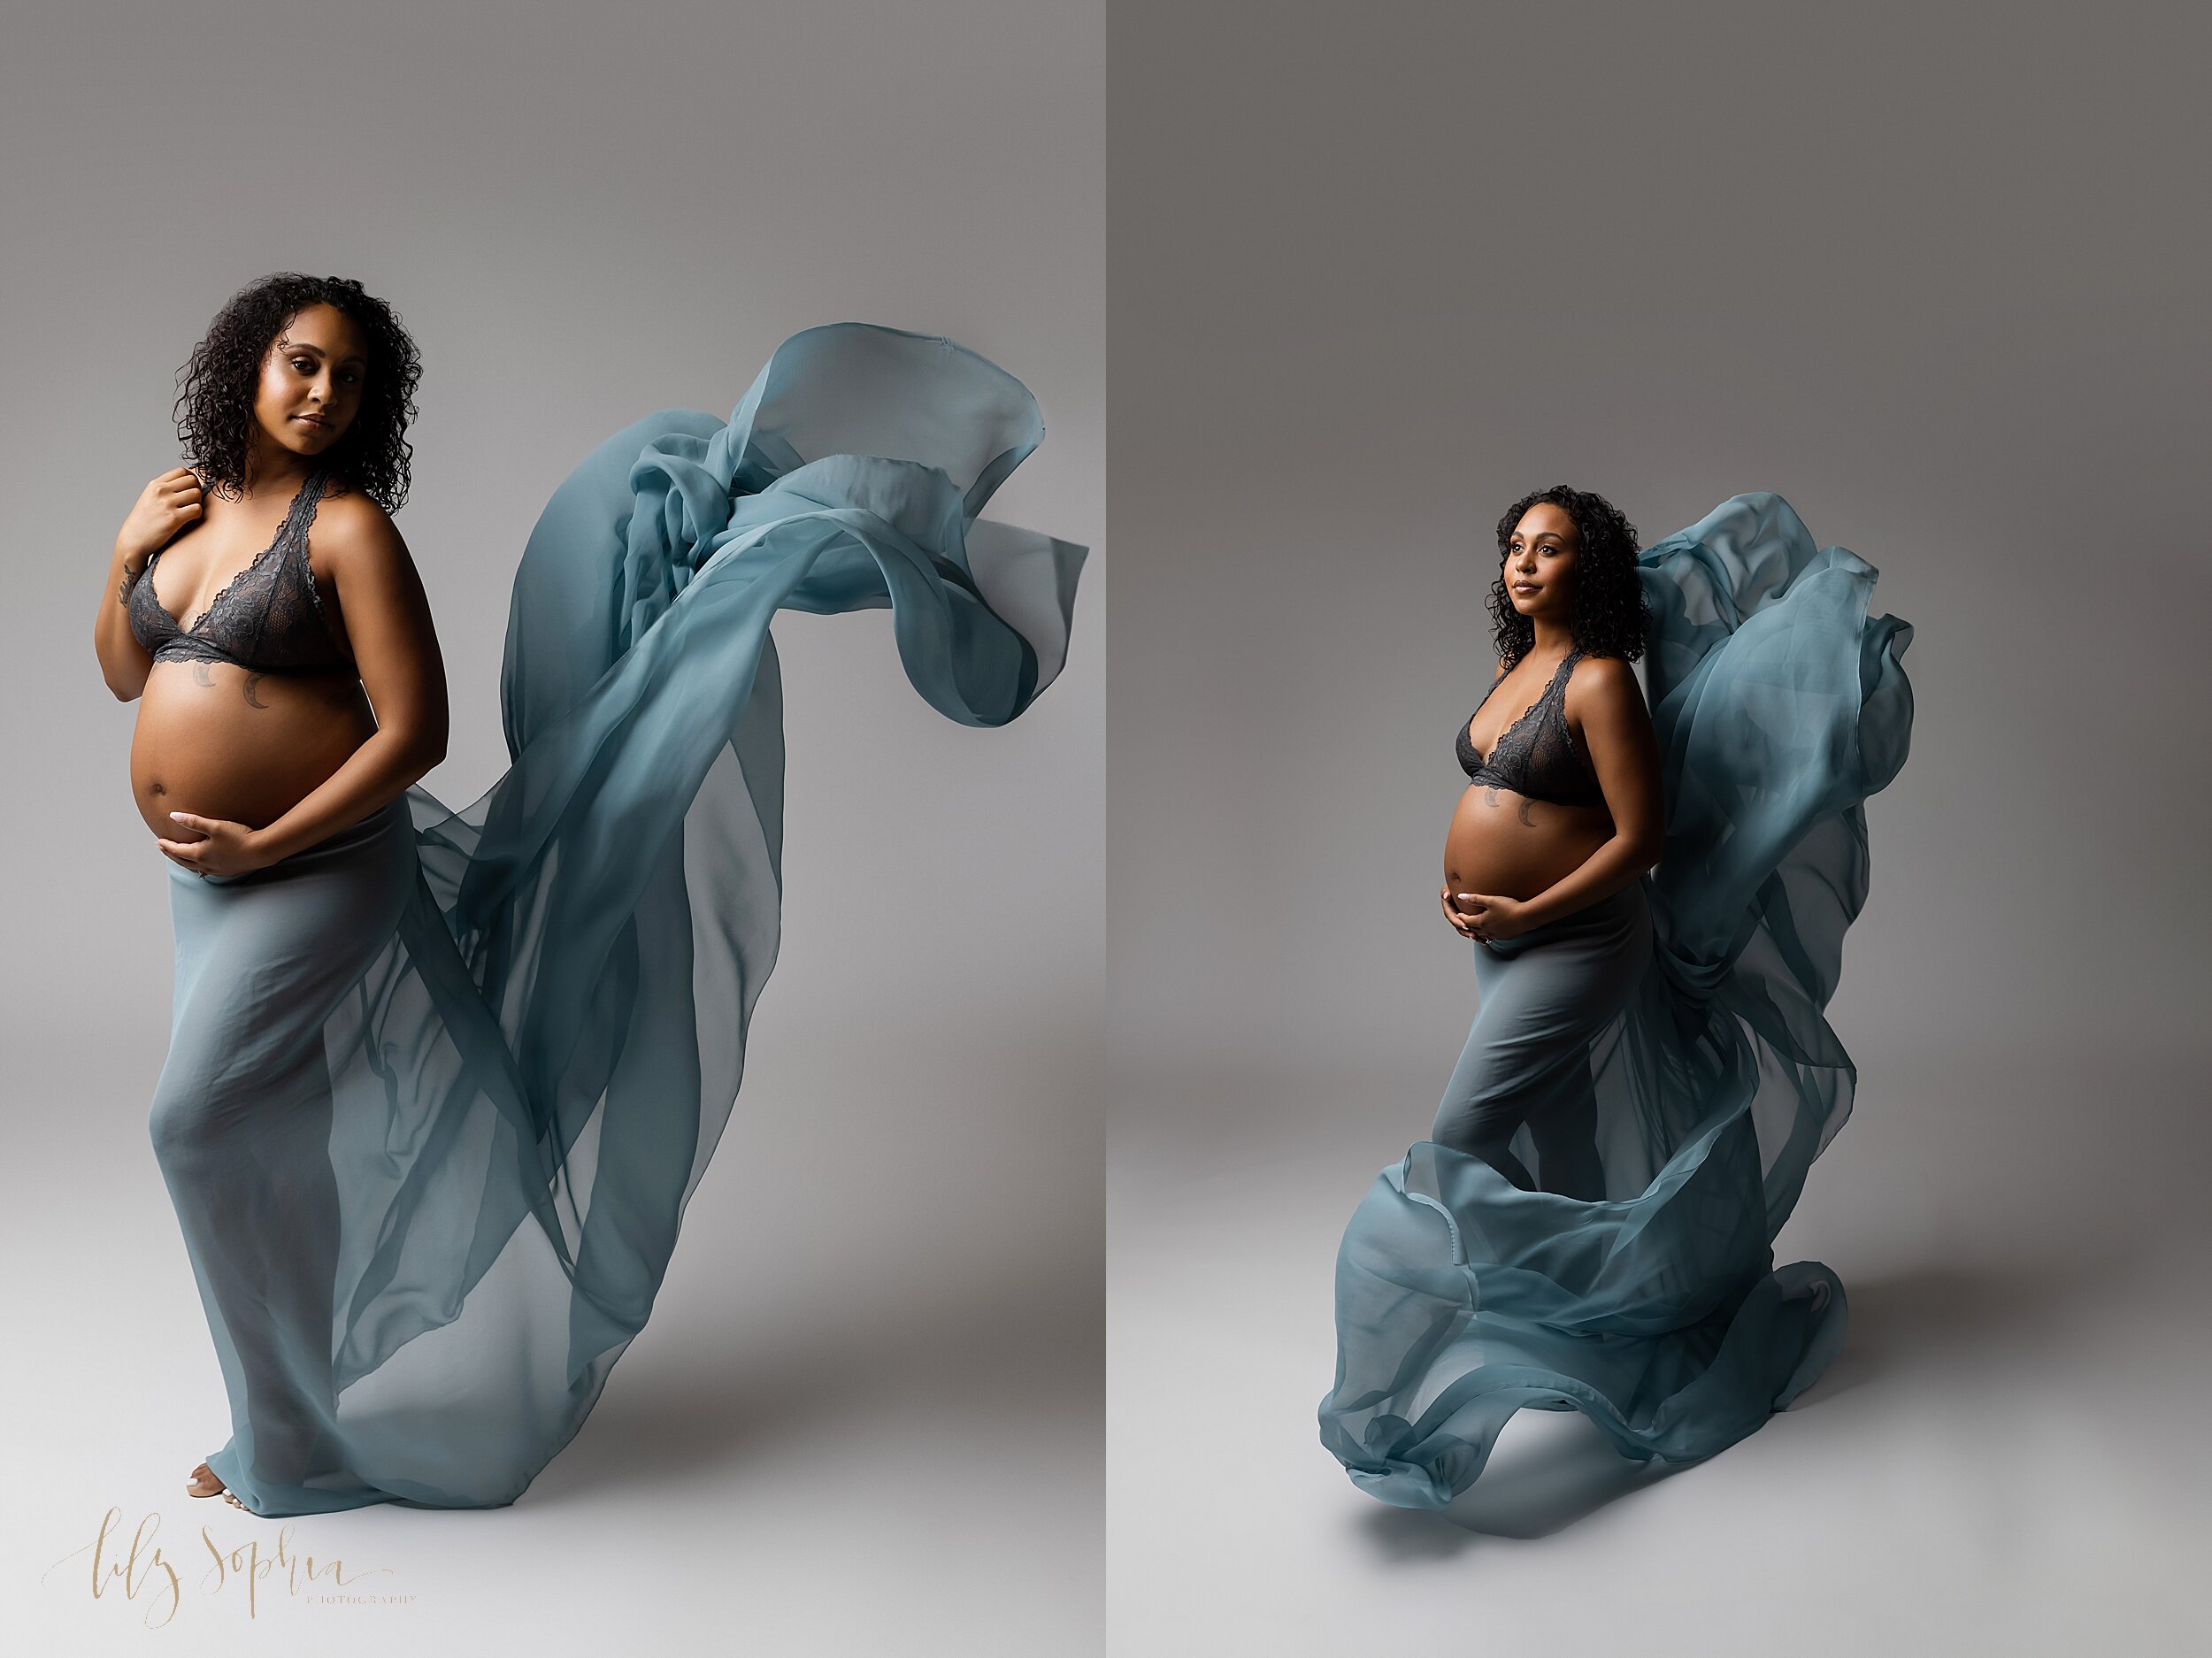  Fine art maternity image taken in Atlanta, Georgia at Lily Sophia Photography of a black pregnant woman in grey lace bra with blue chiffon fabric floating behind her. 